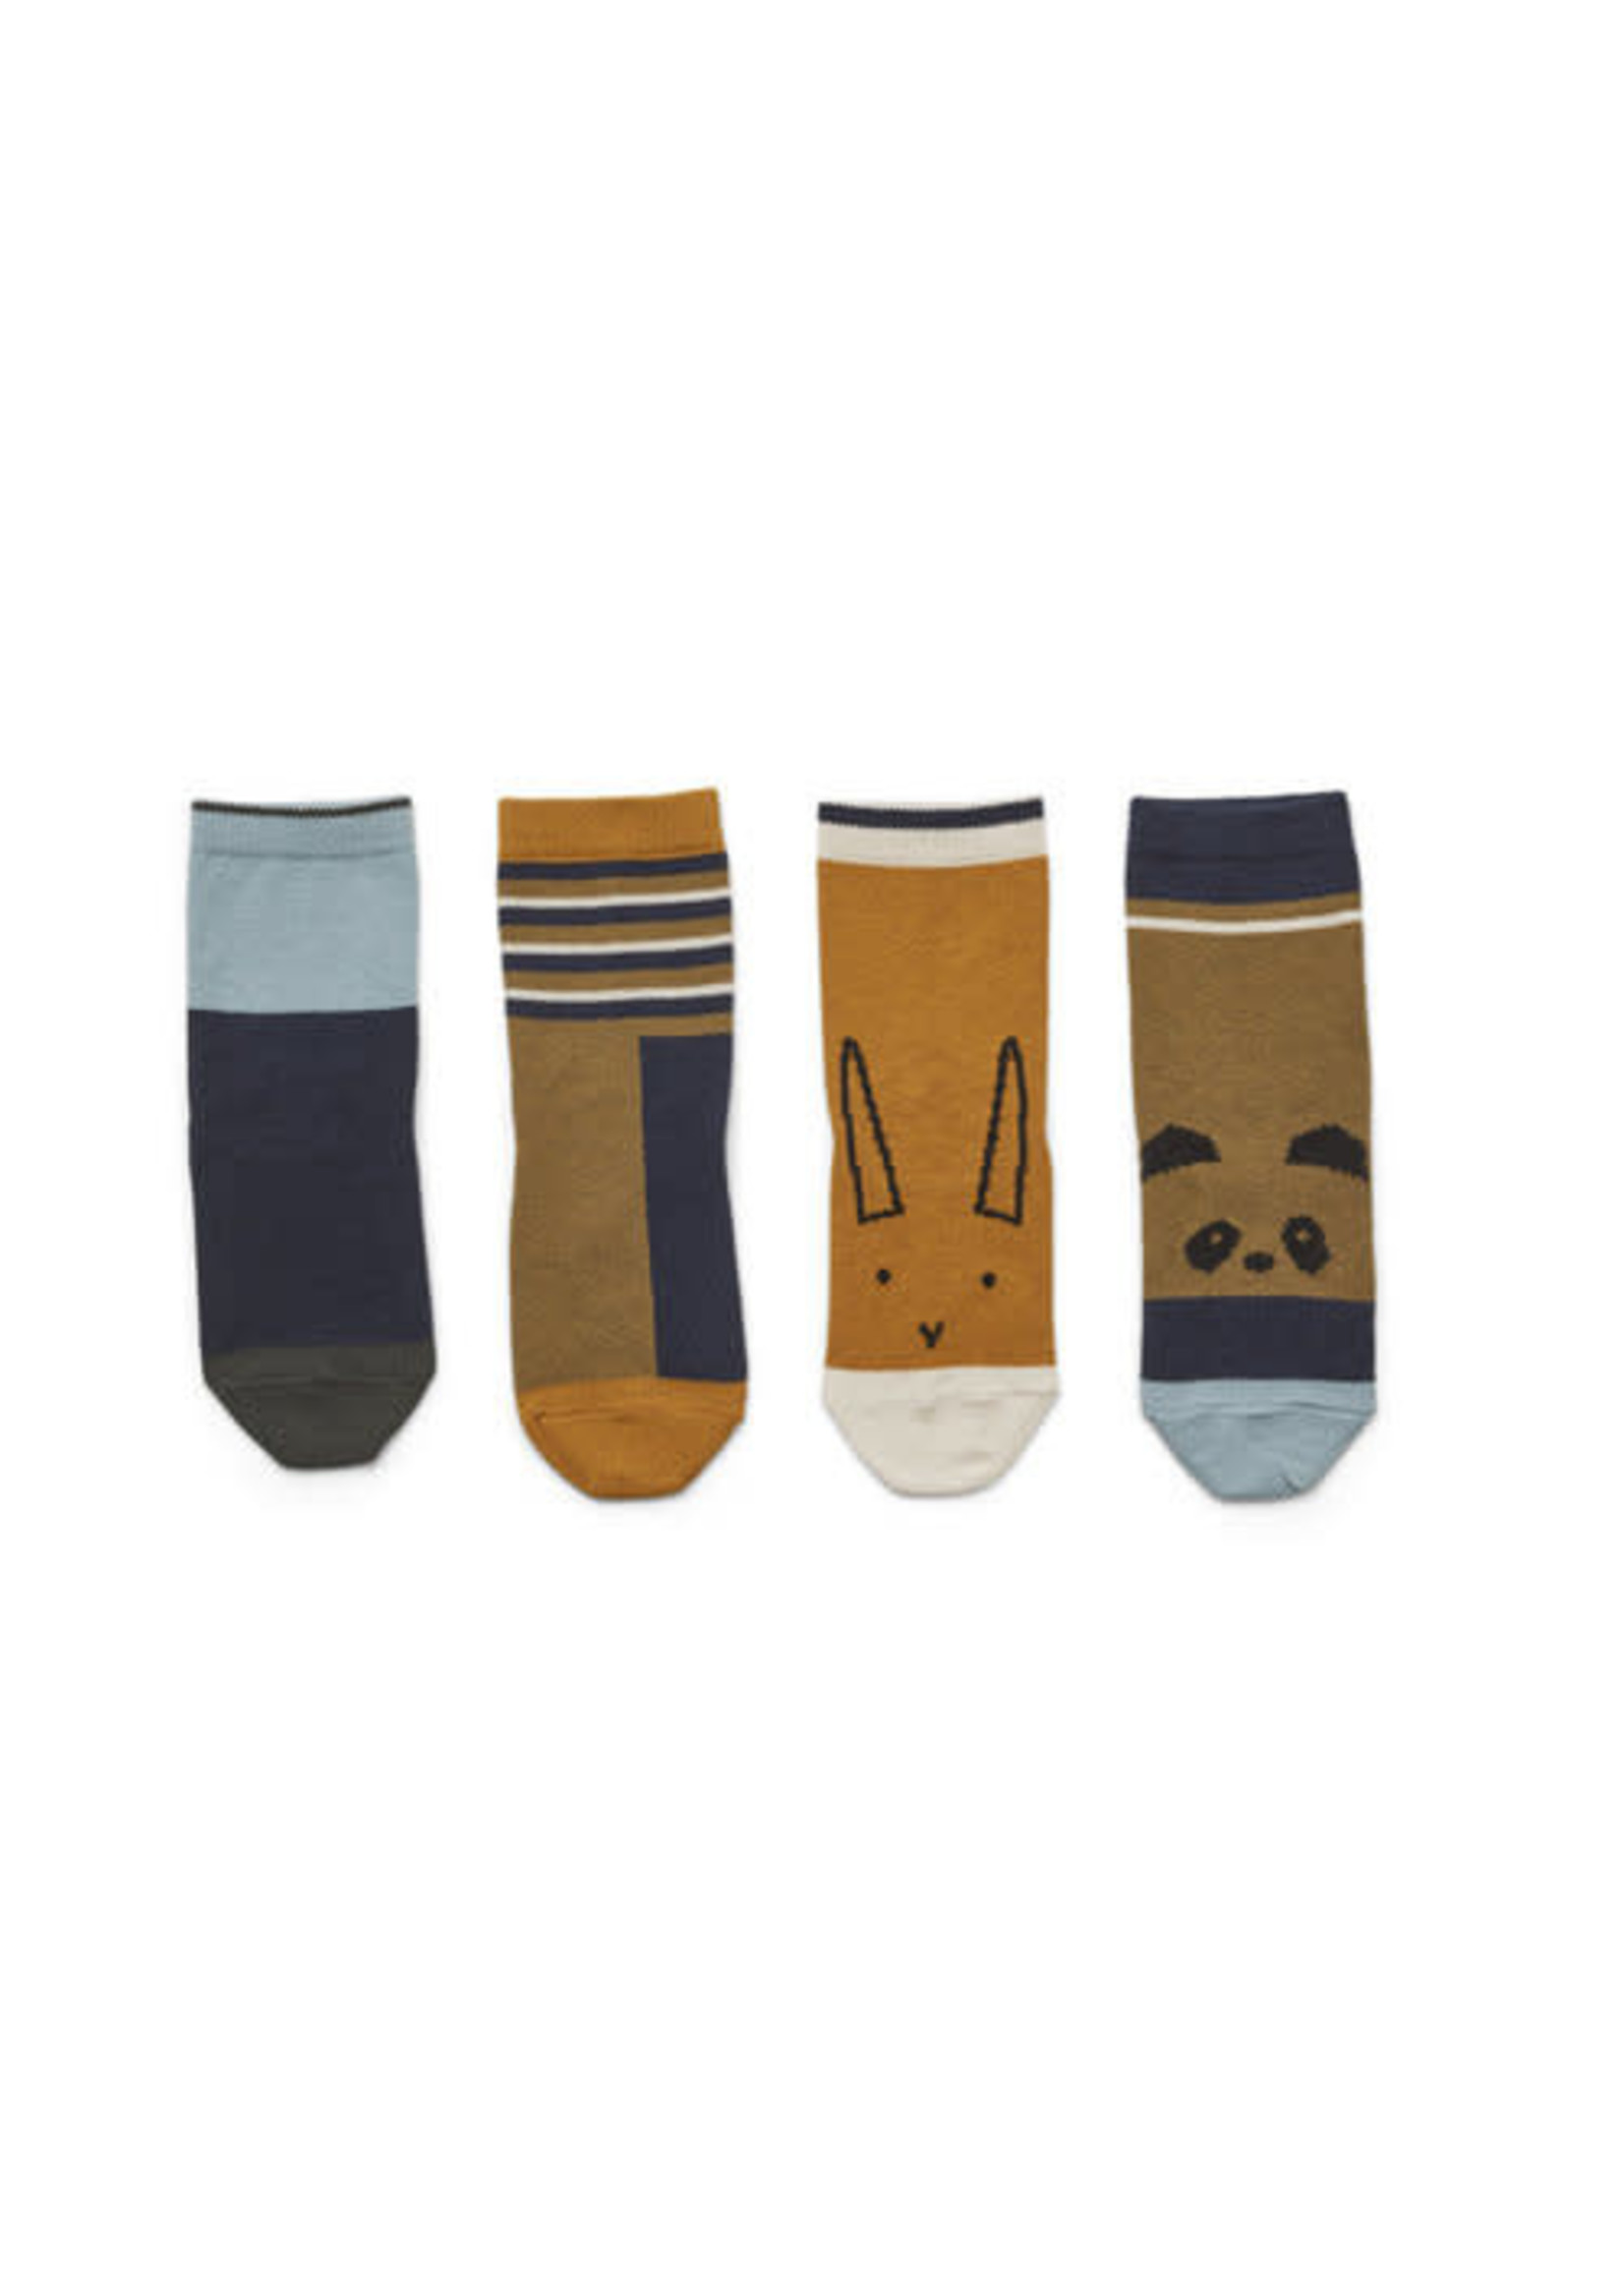 Liewood Liewood Silas Cotton Socks Olive Green Multi Mix (4-pack)